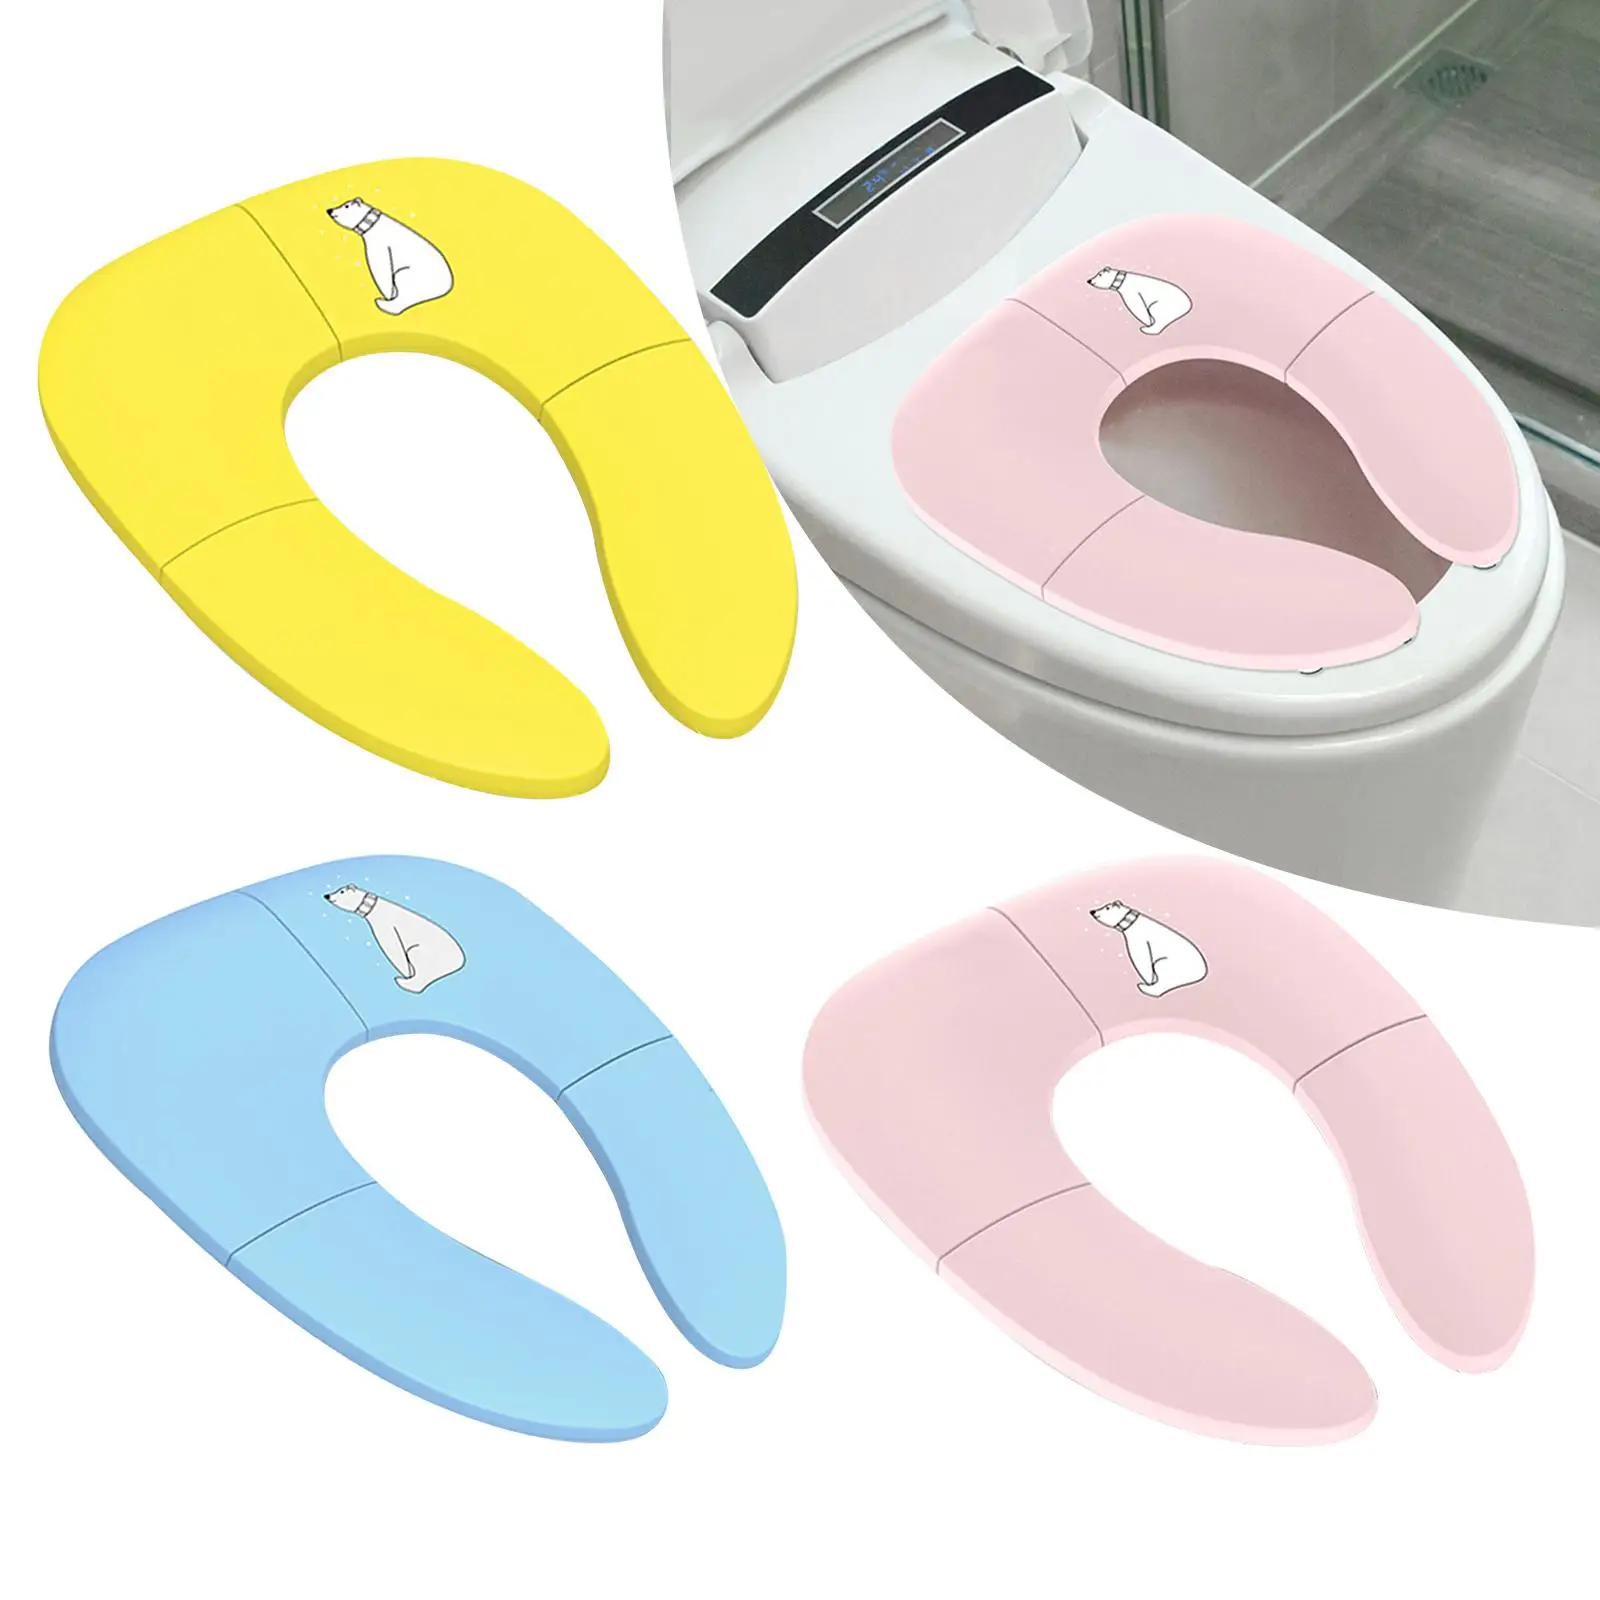 Toilet Cover Upgraded Non Slip Toilet Seat pad for Round and Oval Toilets Adults